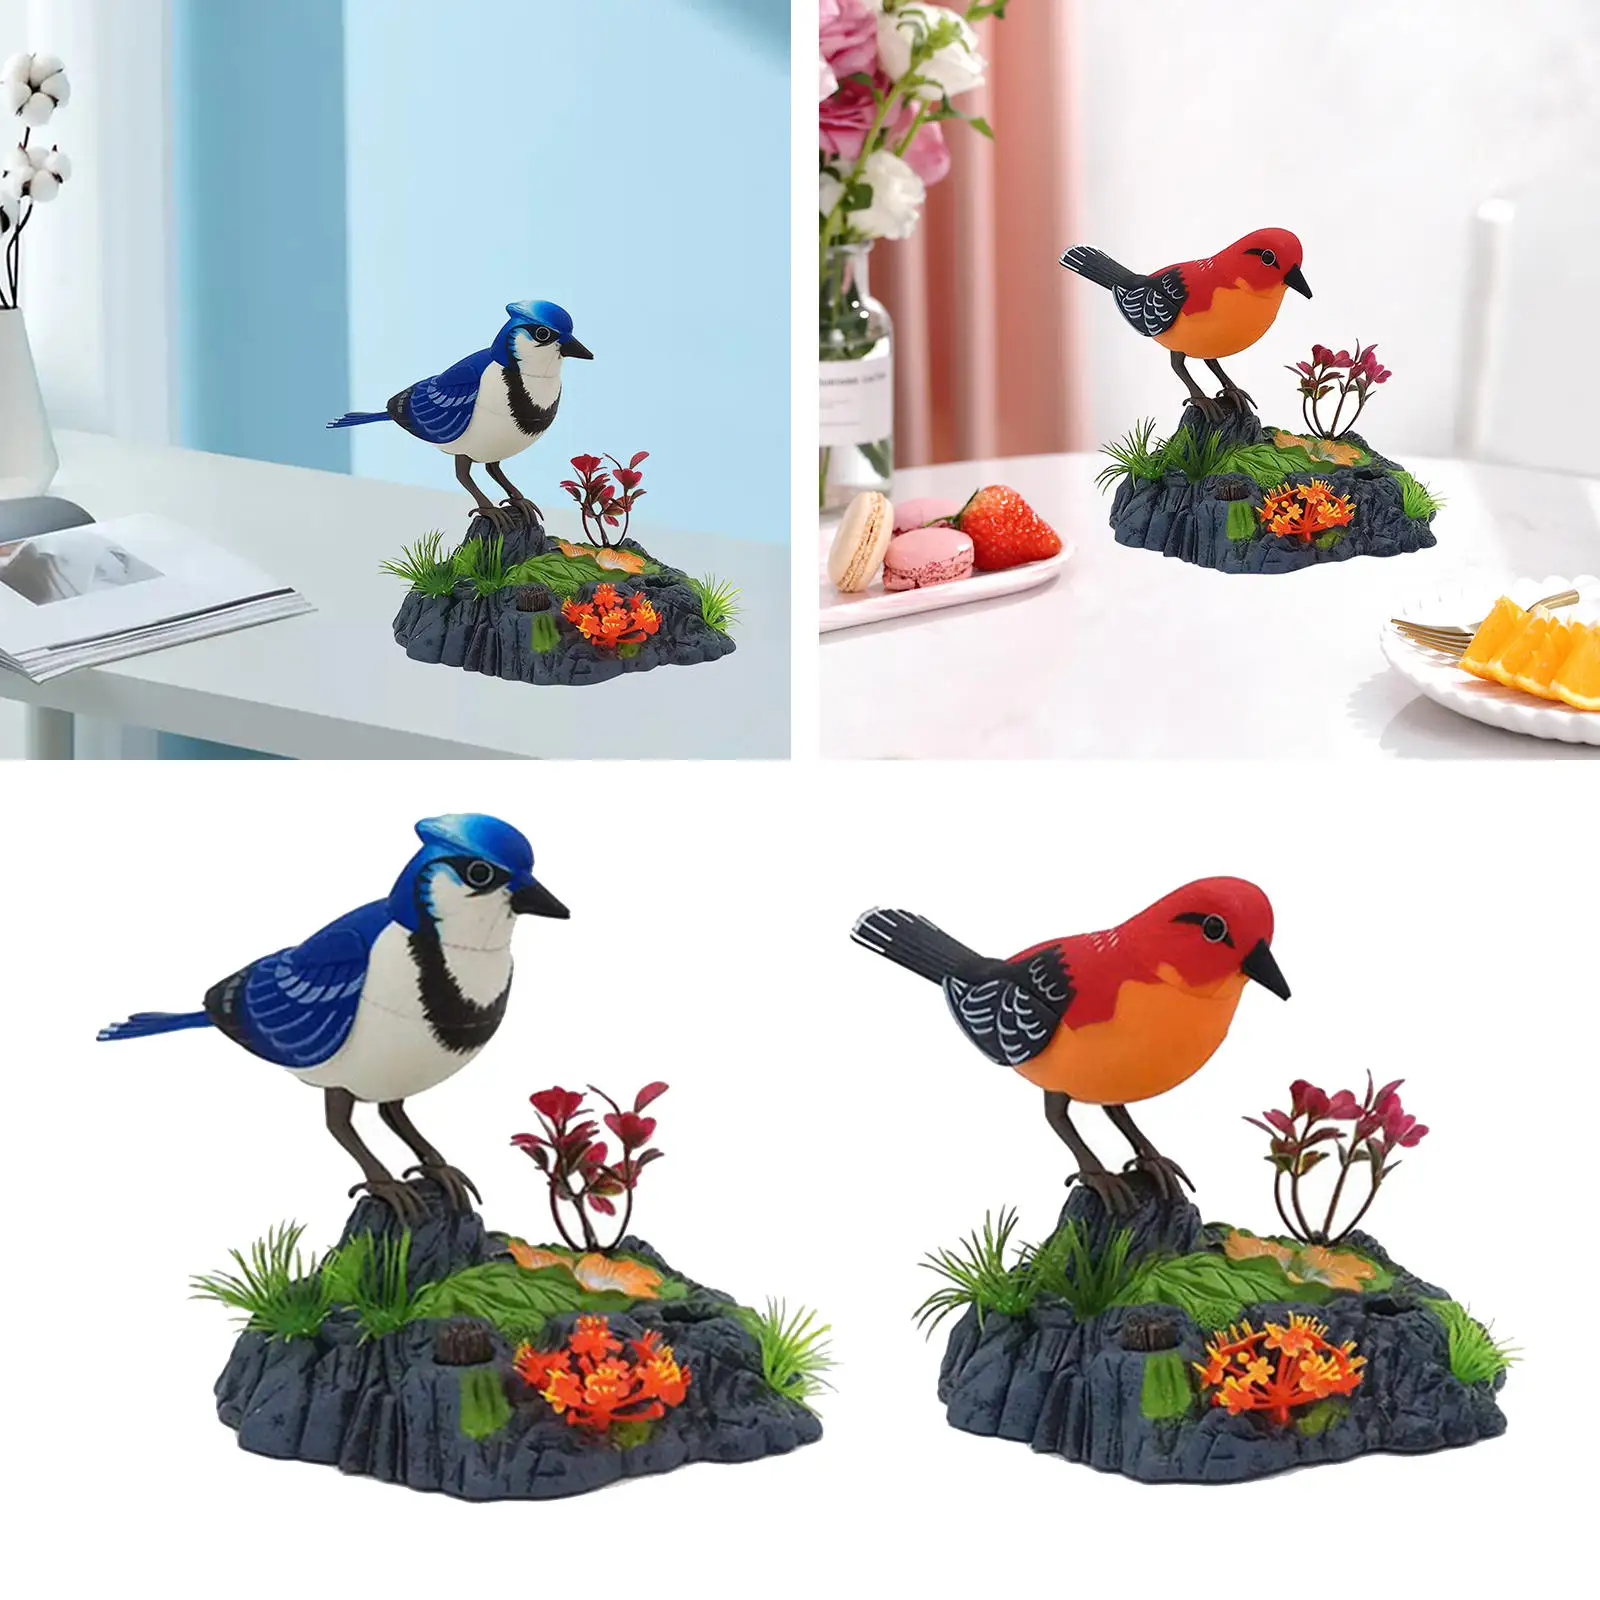 Plastic Bird Toys with Voice Control Moving, Chirping, Bird Festival, Perfect for Home, Bedroom, Decoration, Education,